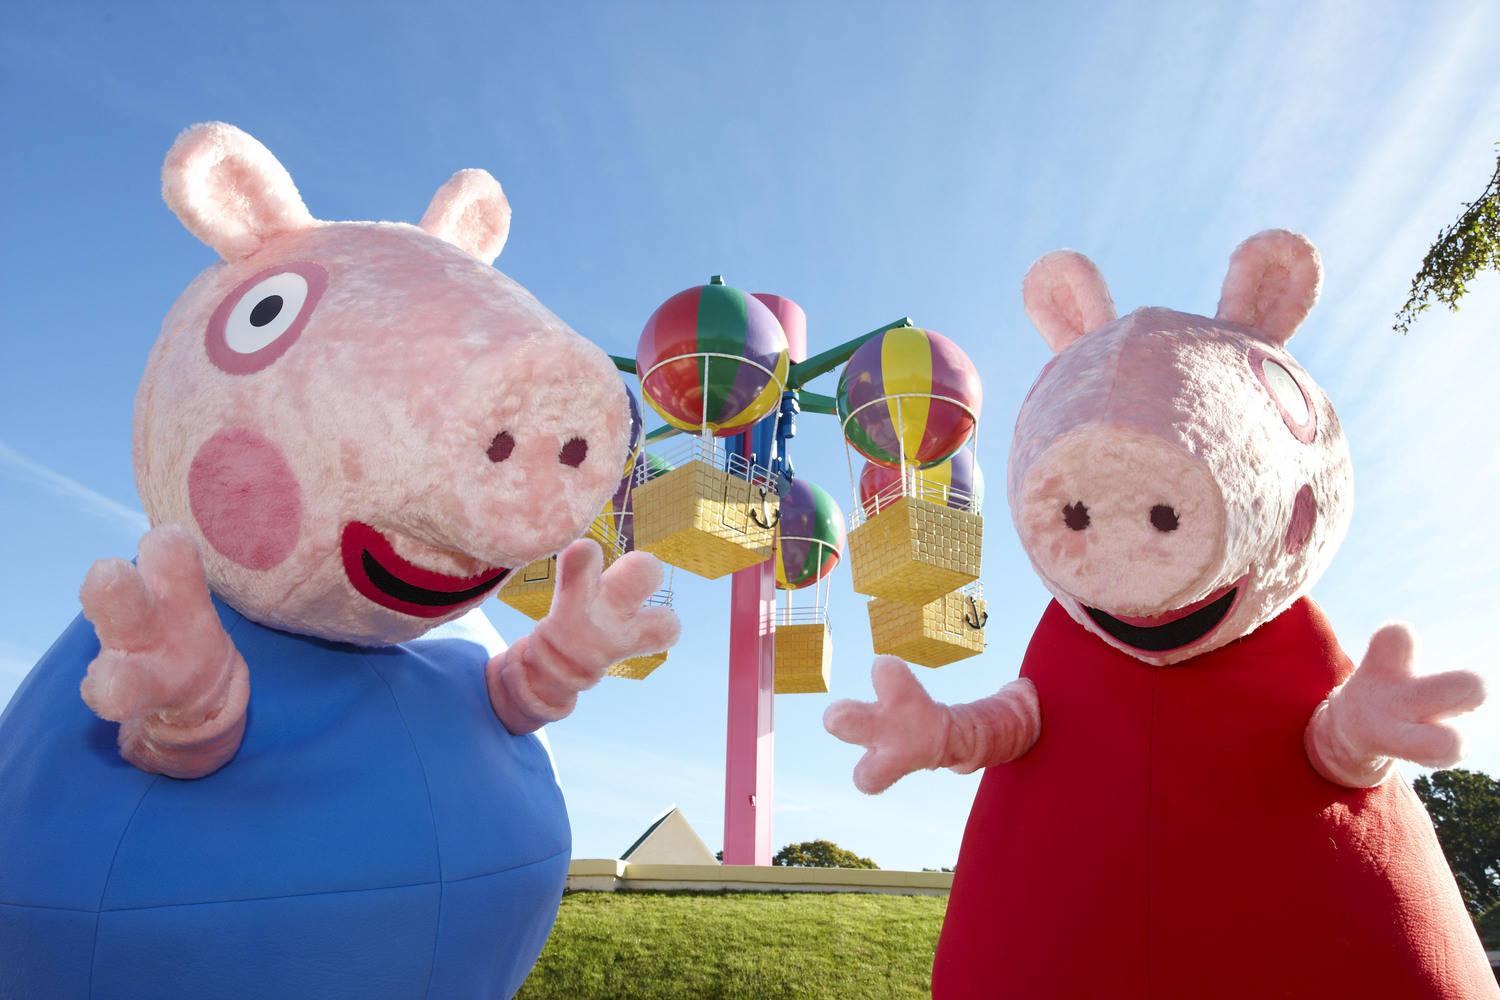 Peppa Pig and George with Peppa's Big Balloon Ride in background